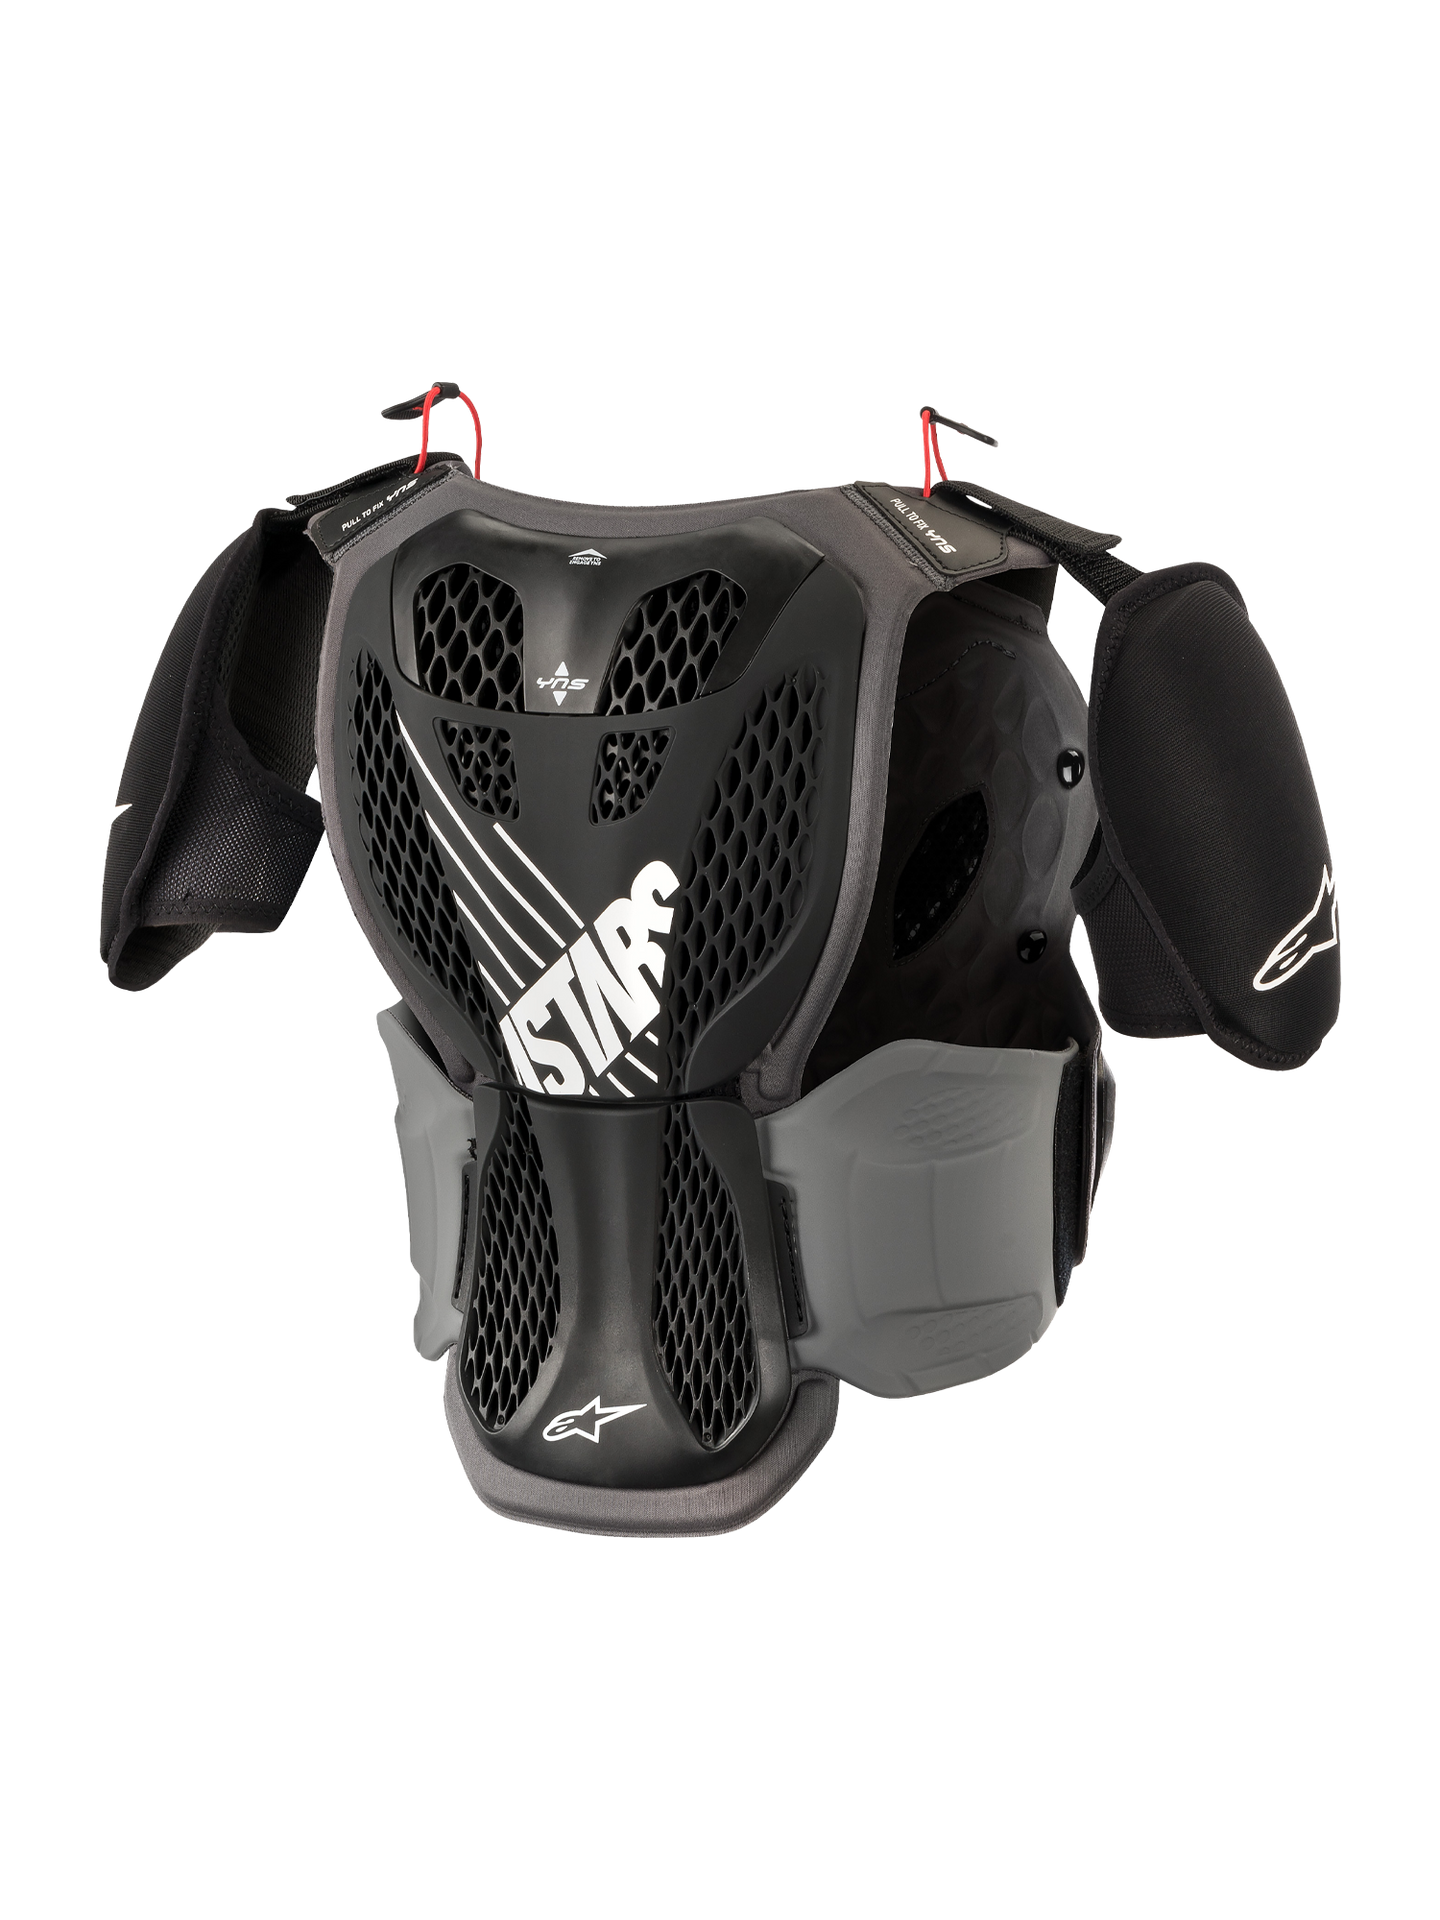 Youth A-5 S Body Armour